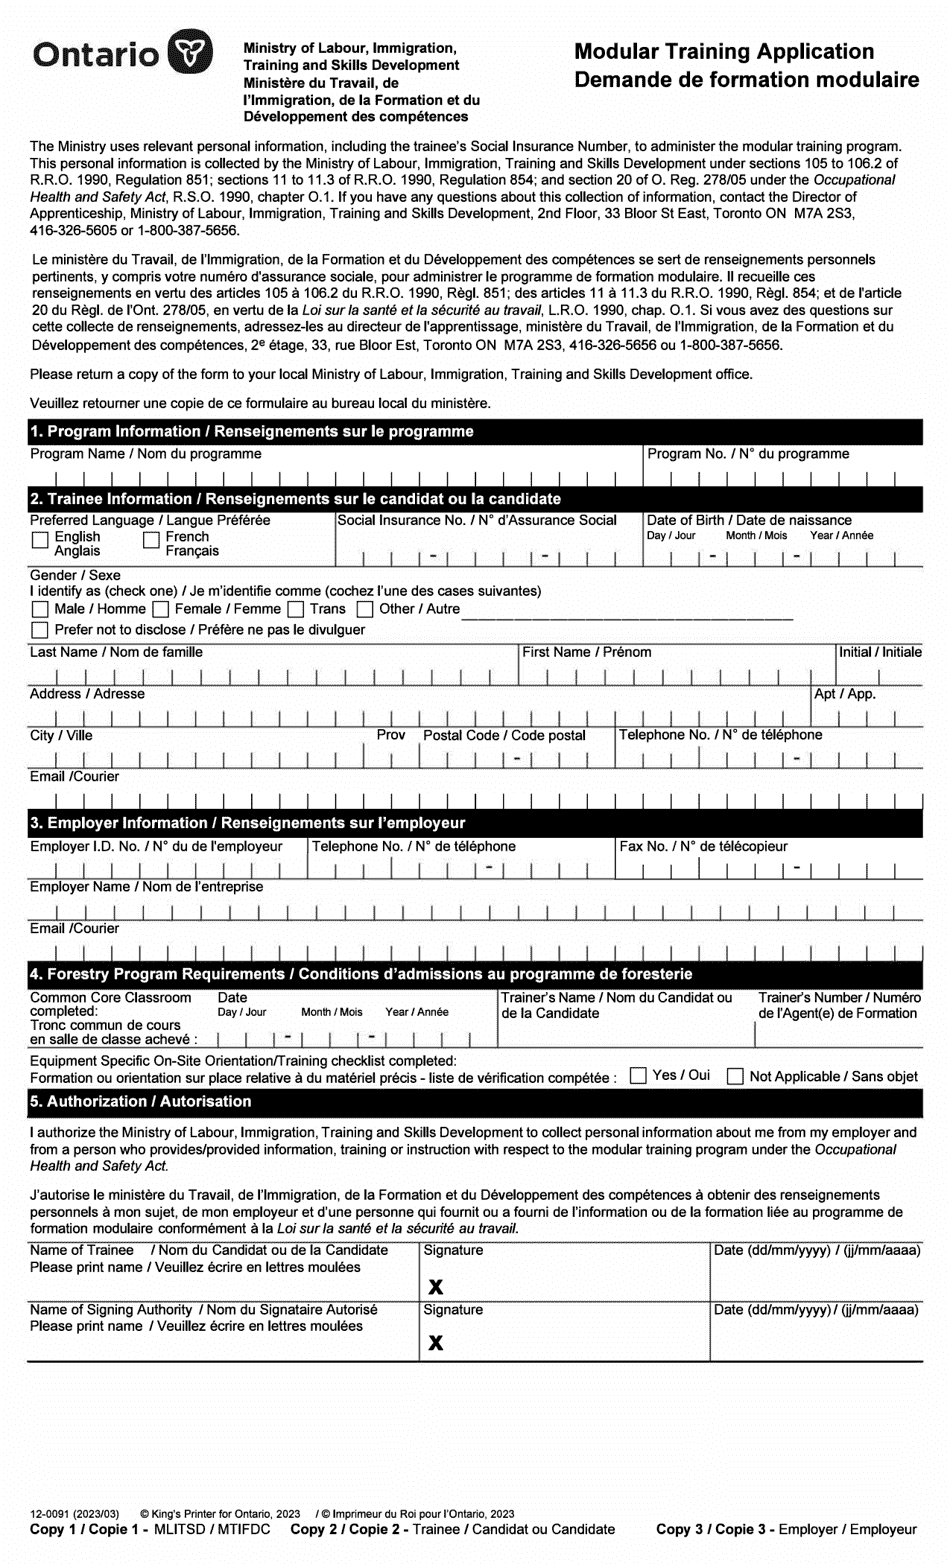 Form 12-0091 Modular Training Application - Ontario, Canada (English / French), Page 1